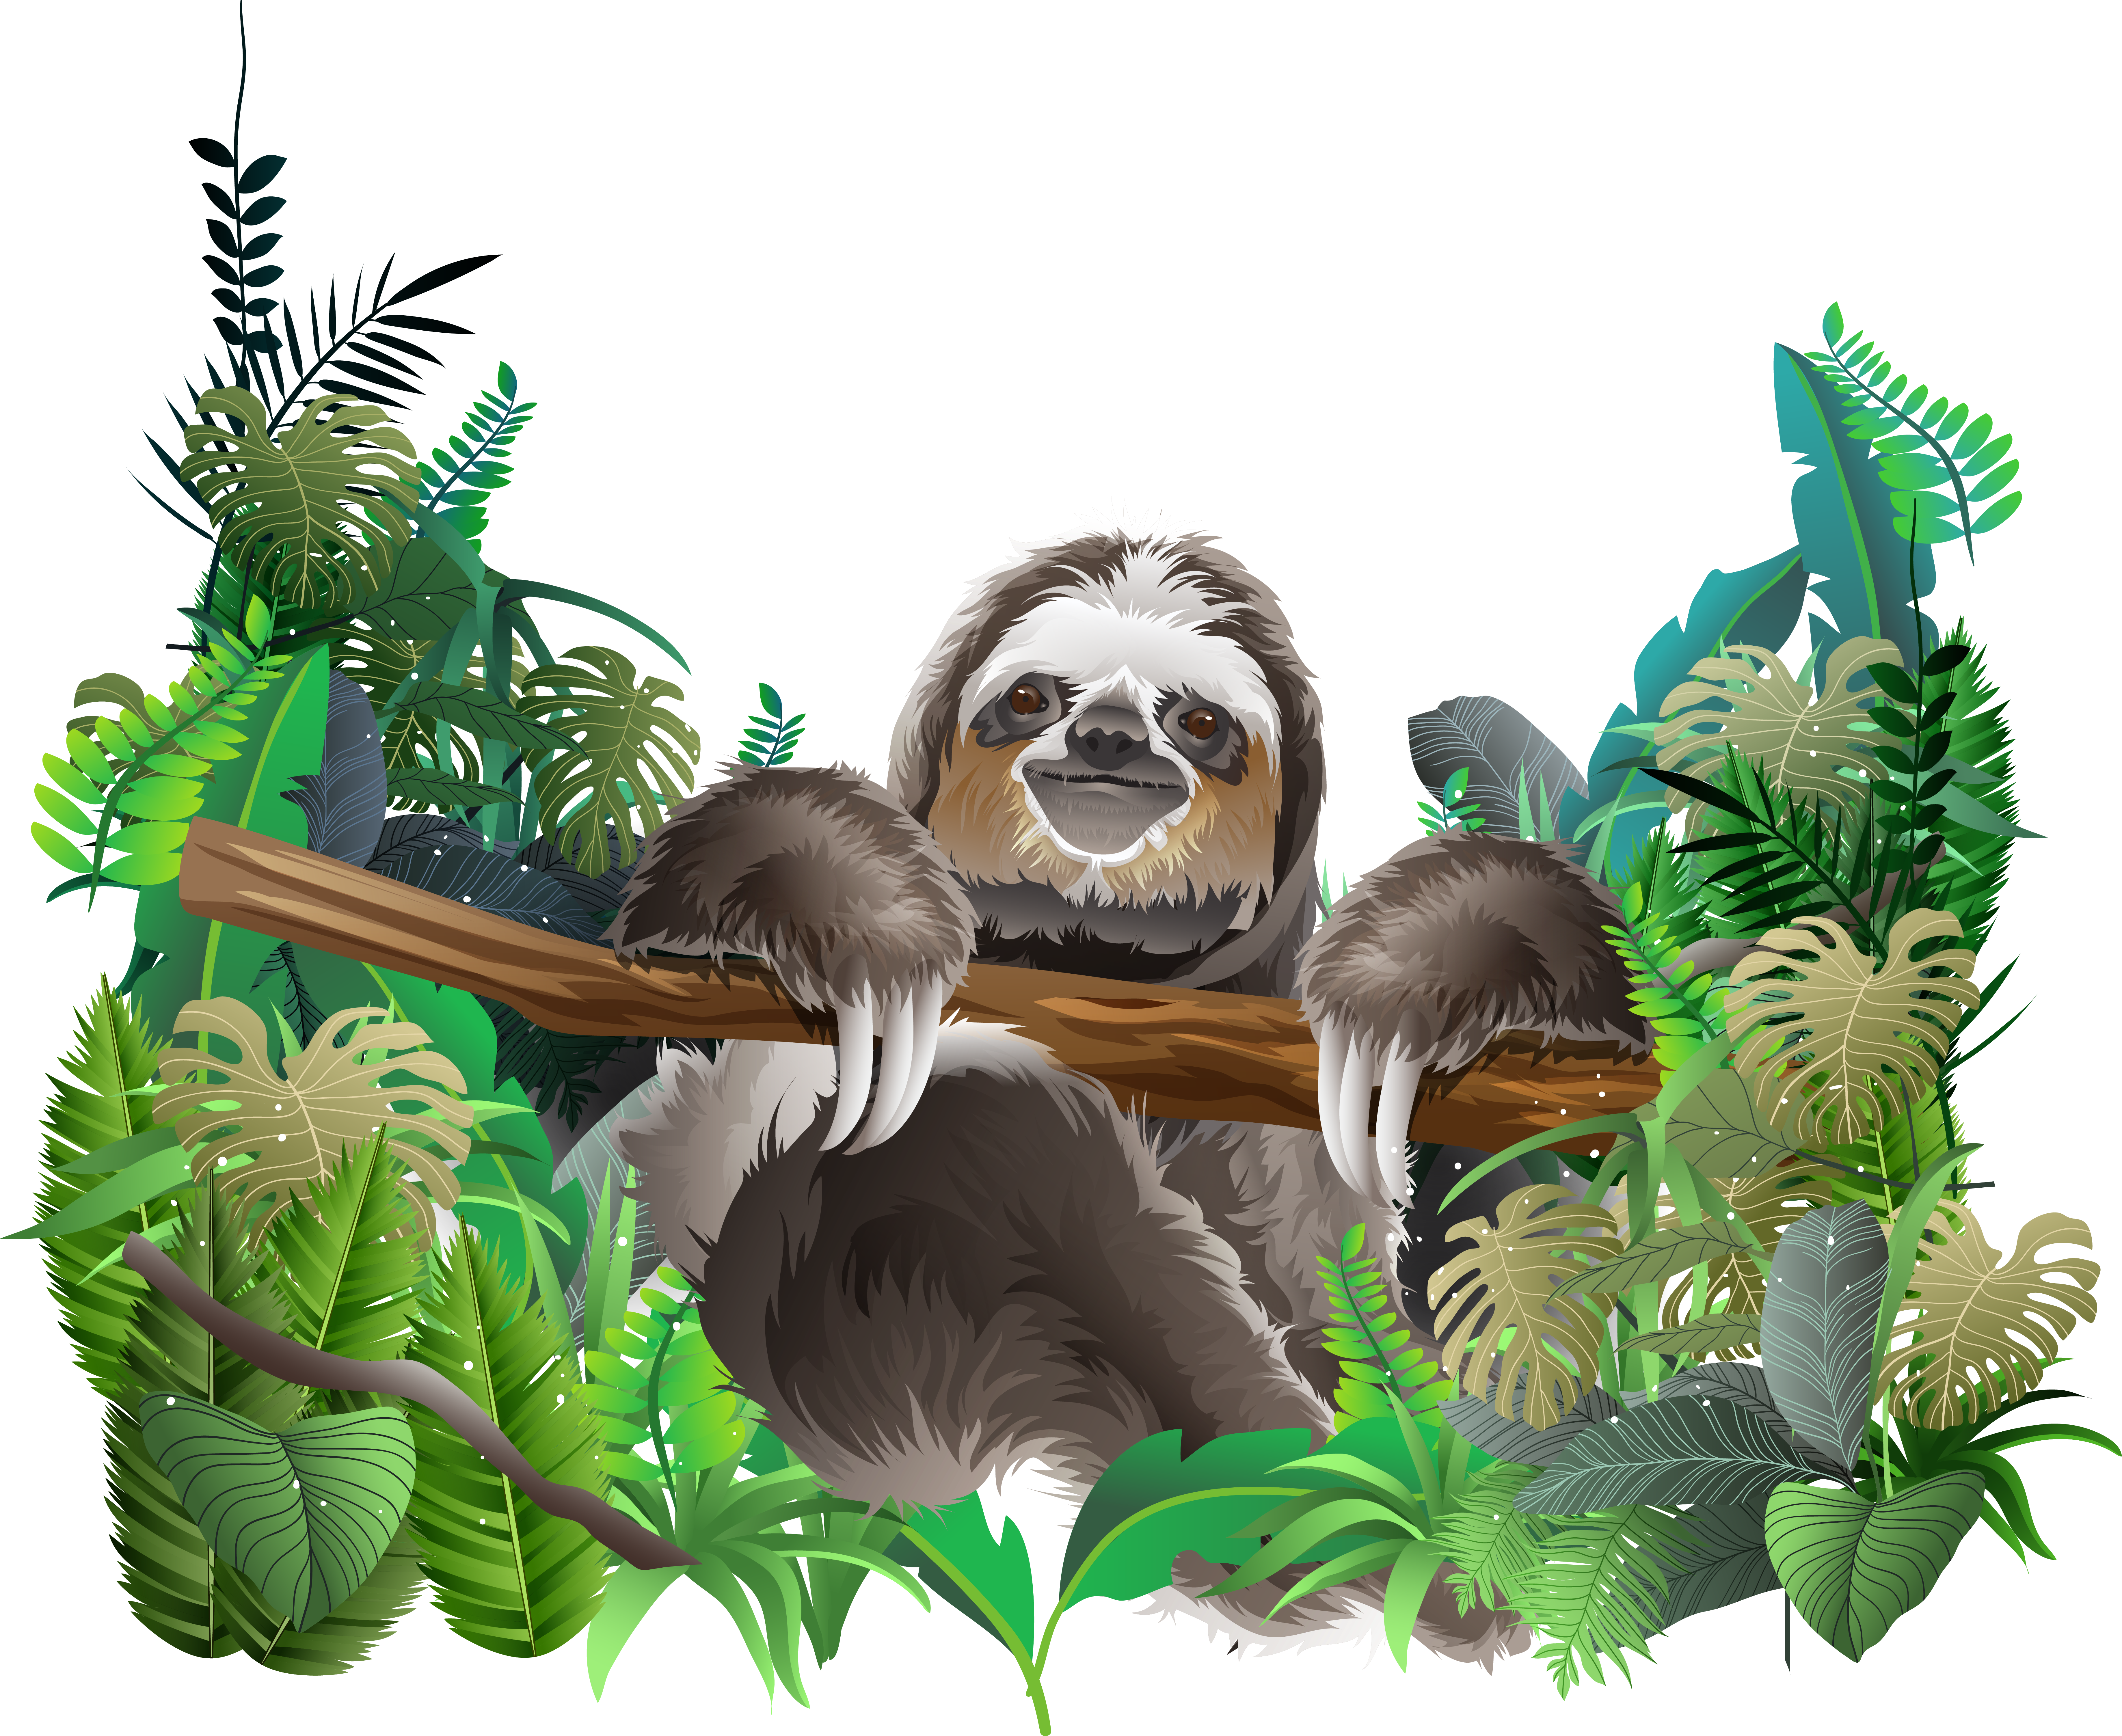 A Sloth Holding A Branch In The Jungle